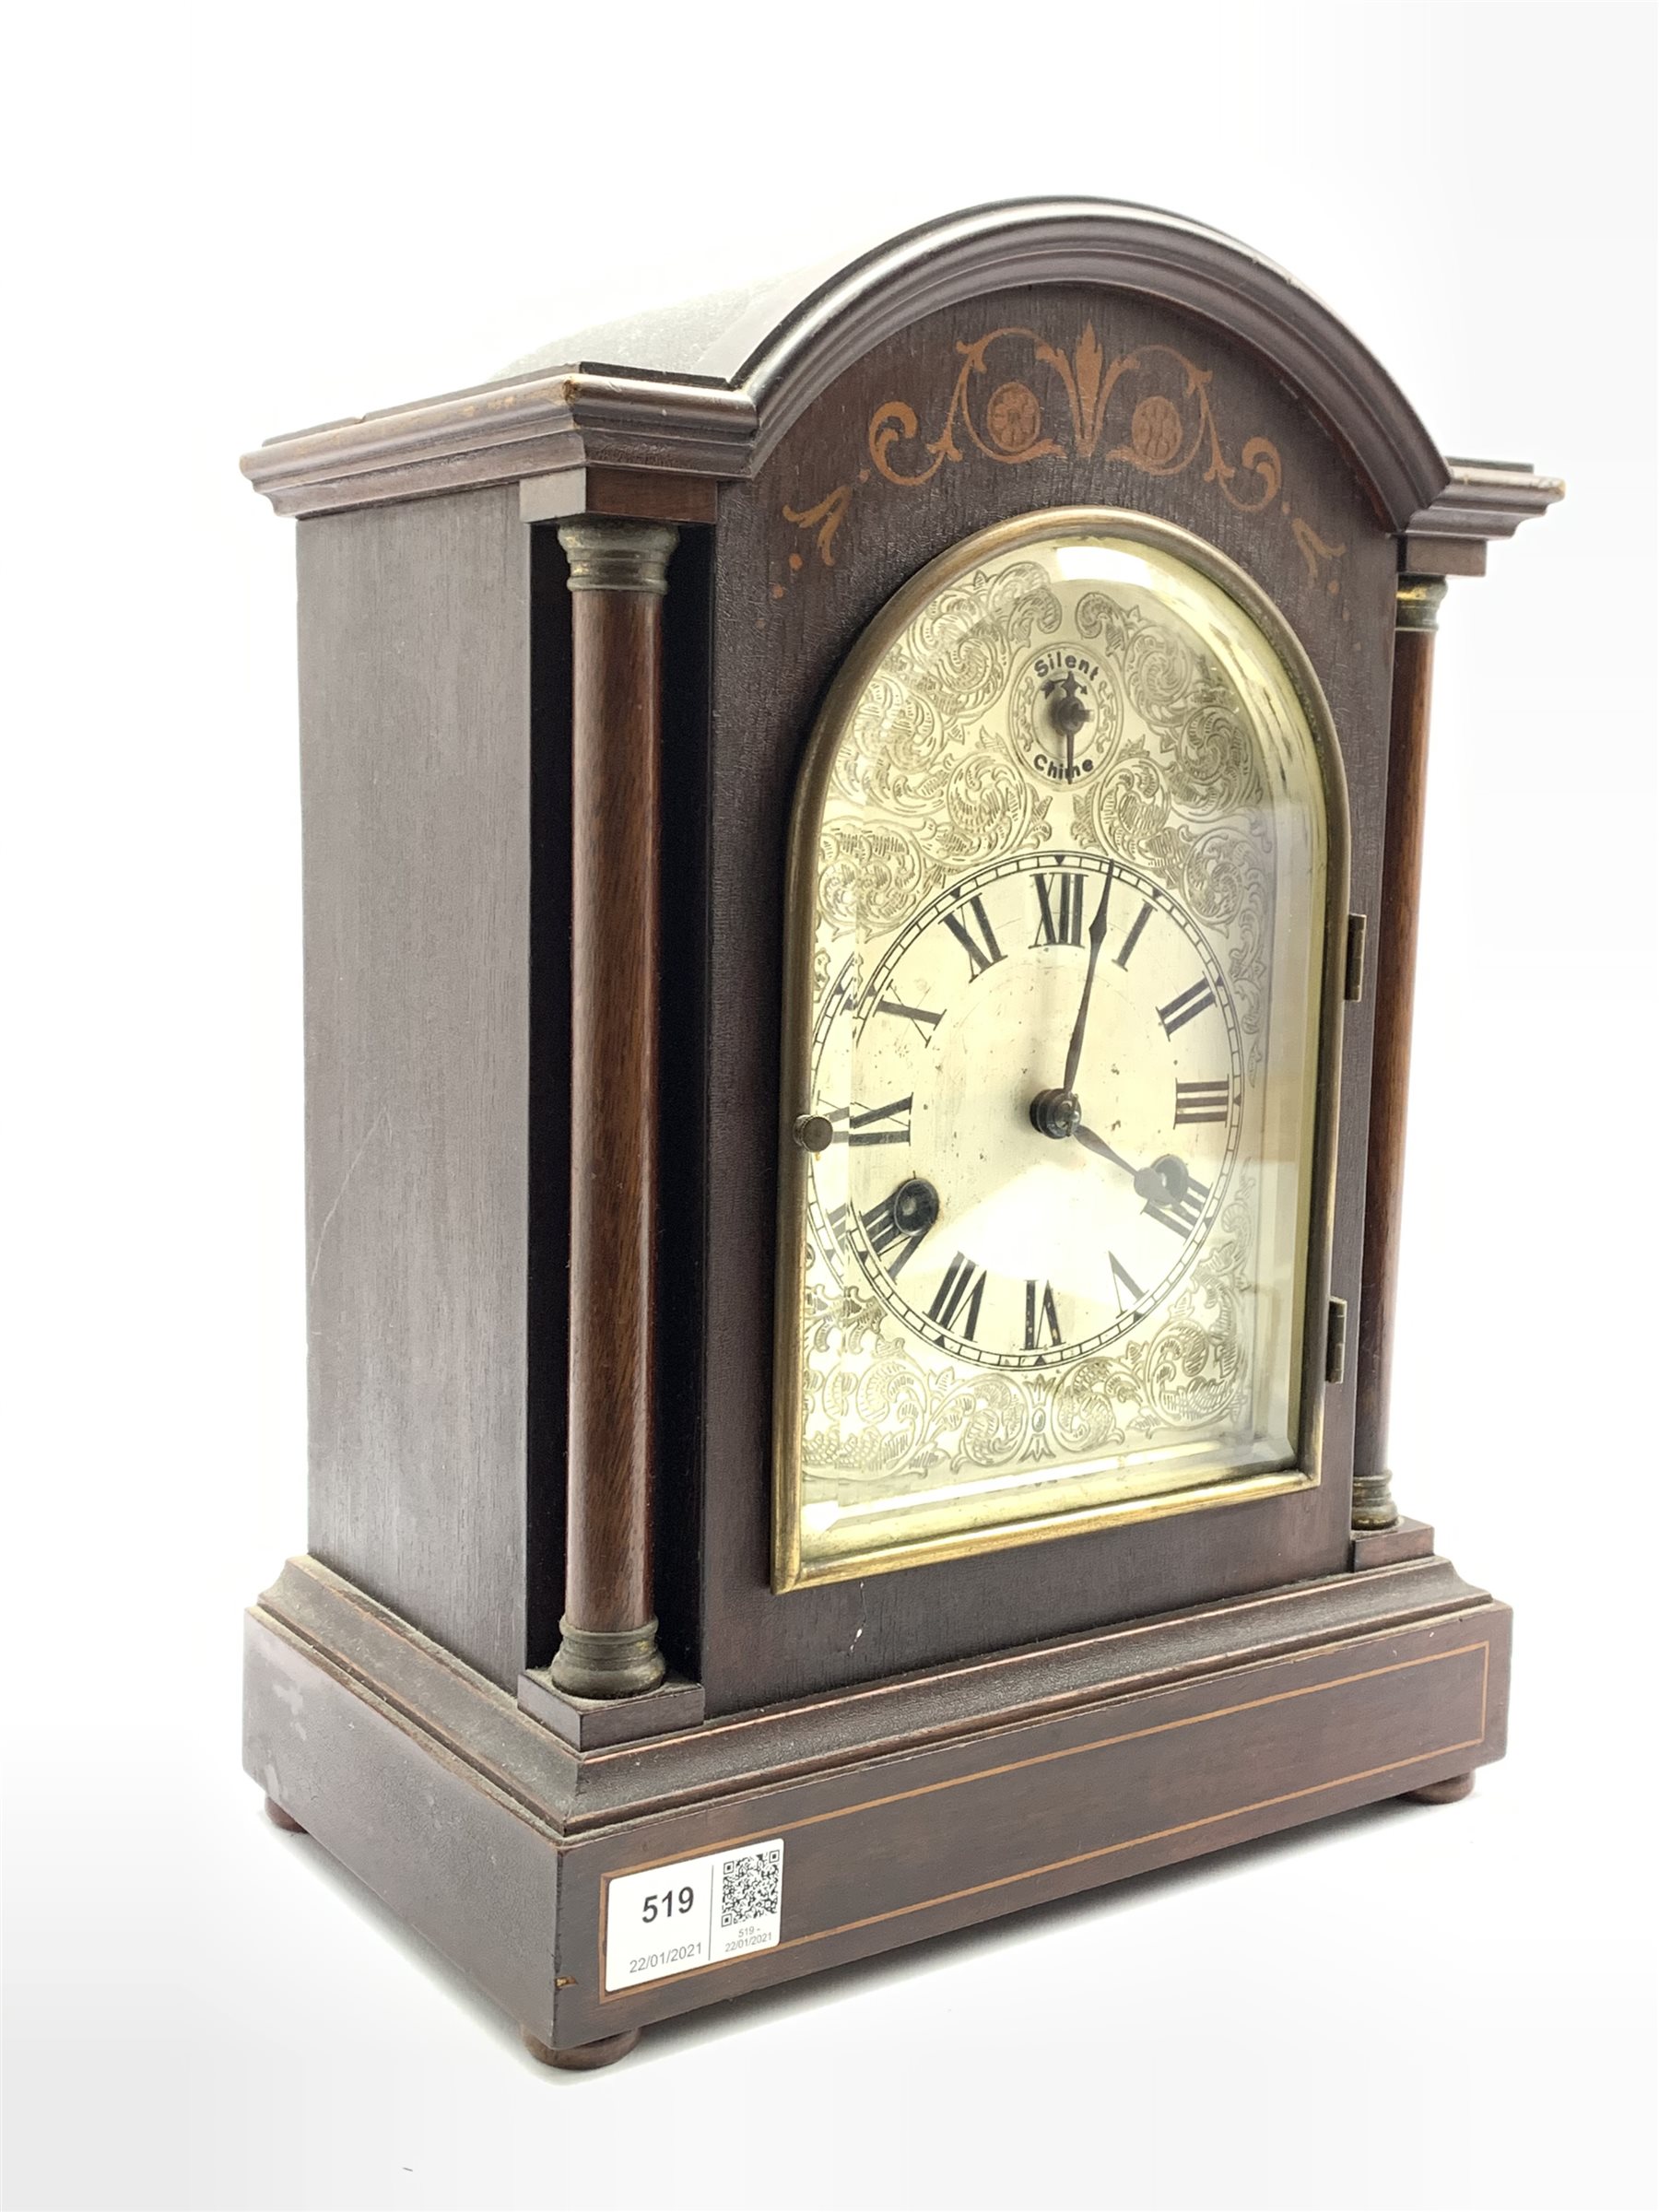 20th century dome top mantel clock, the case with floral and string inlay, silvered dial with Roman - Image 2 of 3